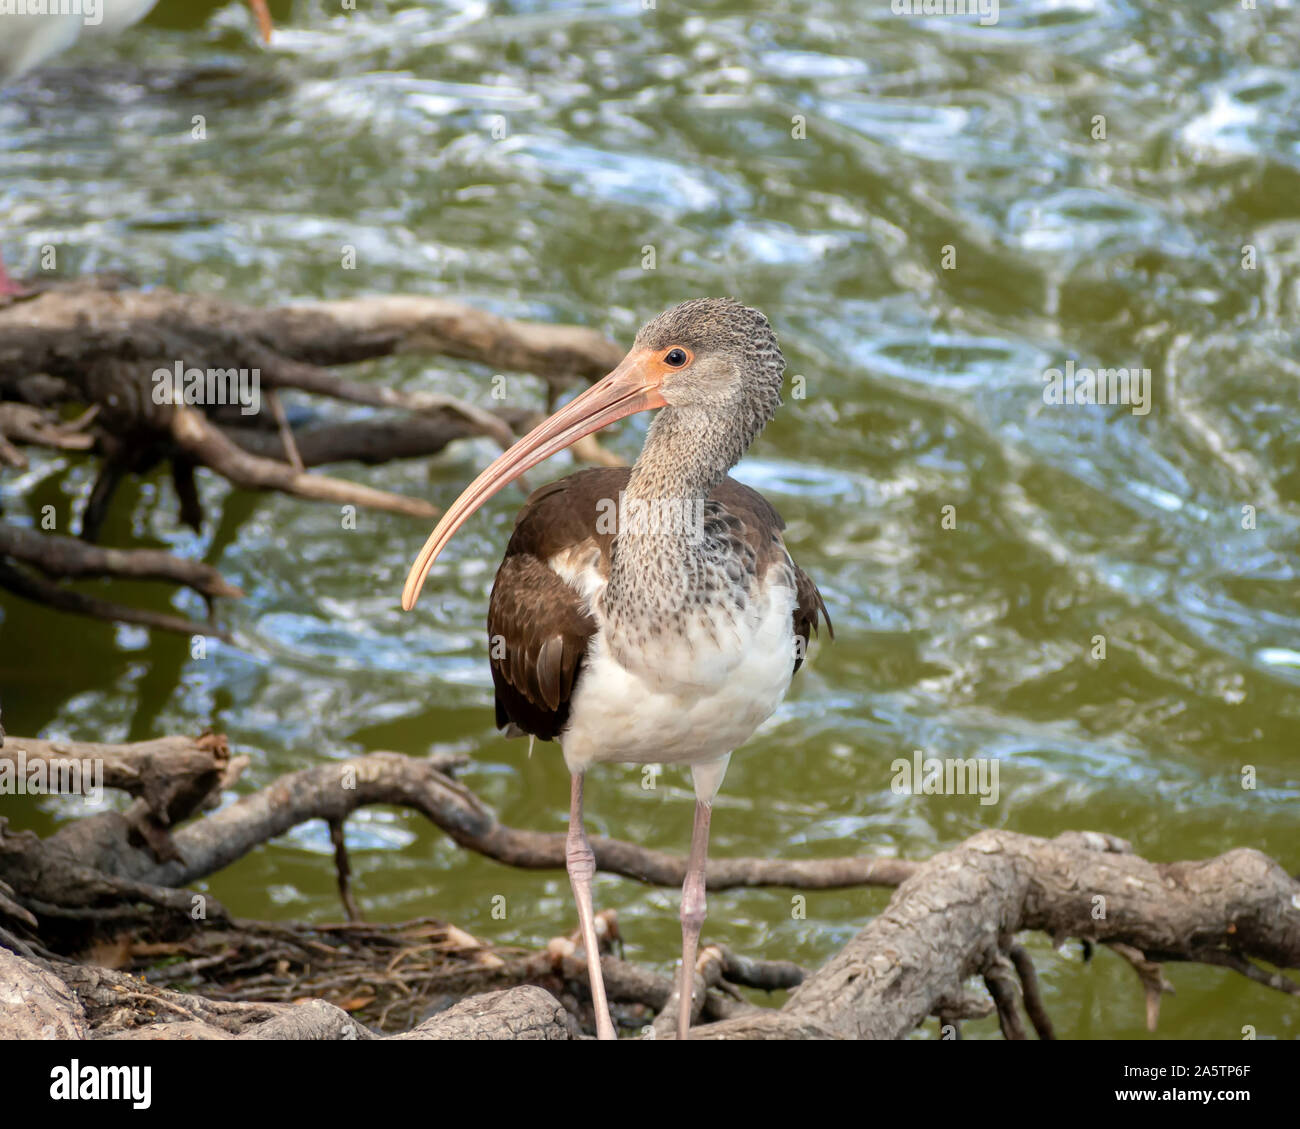 A juvenile American White Ibis standing among tree roots at the edge of a pond with water in background. Lakeview park in Corpus Christi, Texas USA. Stock Photo